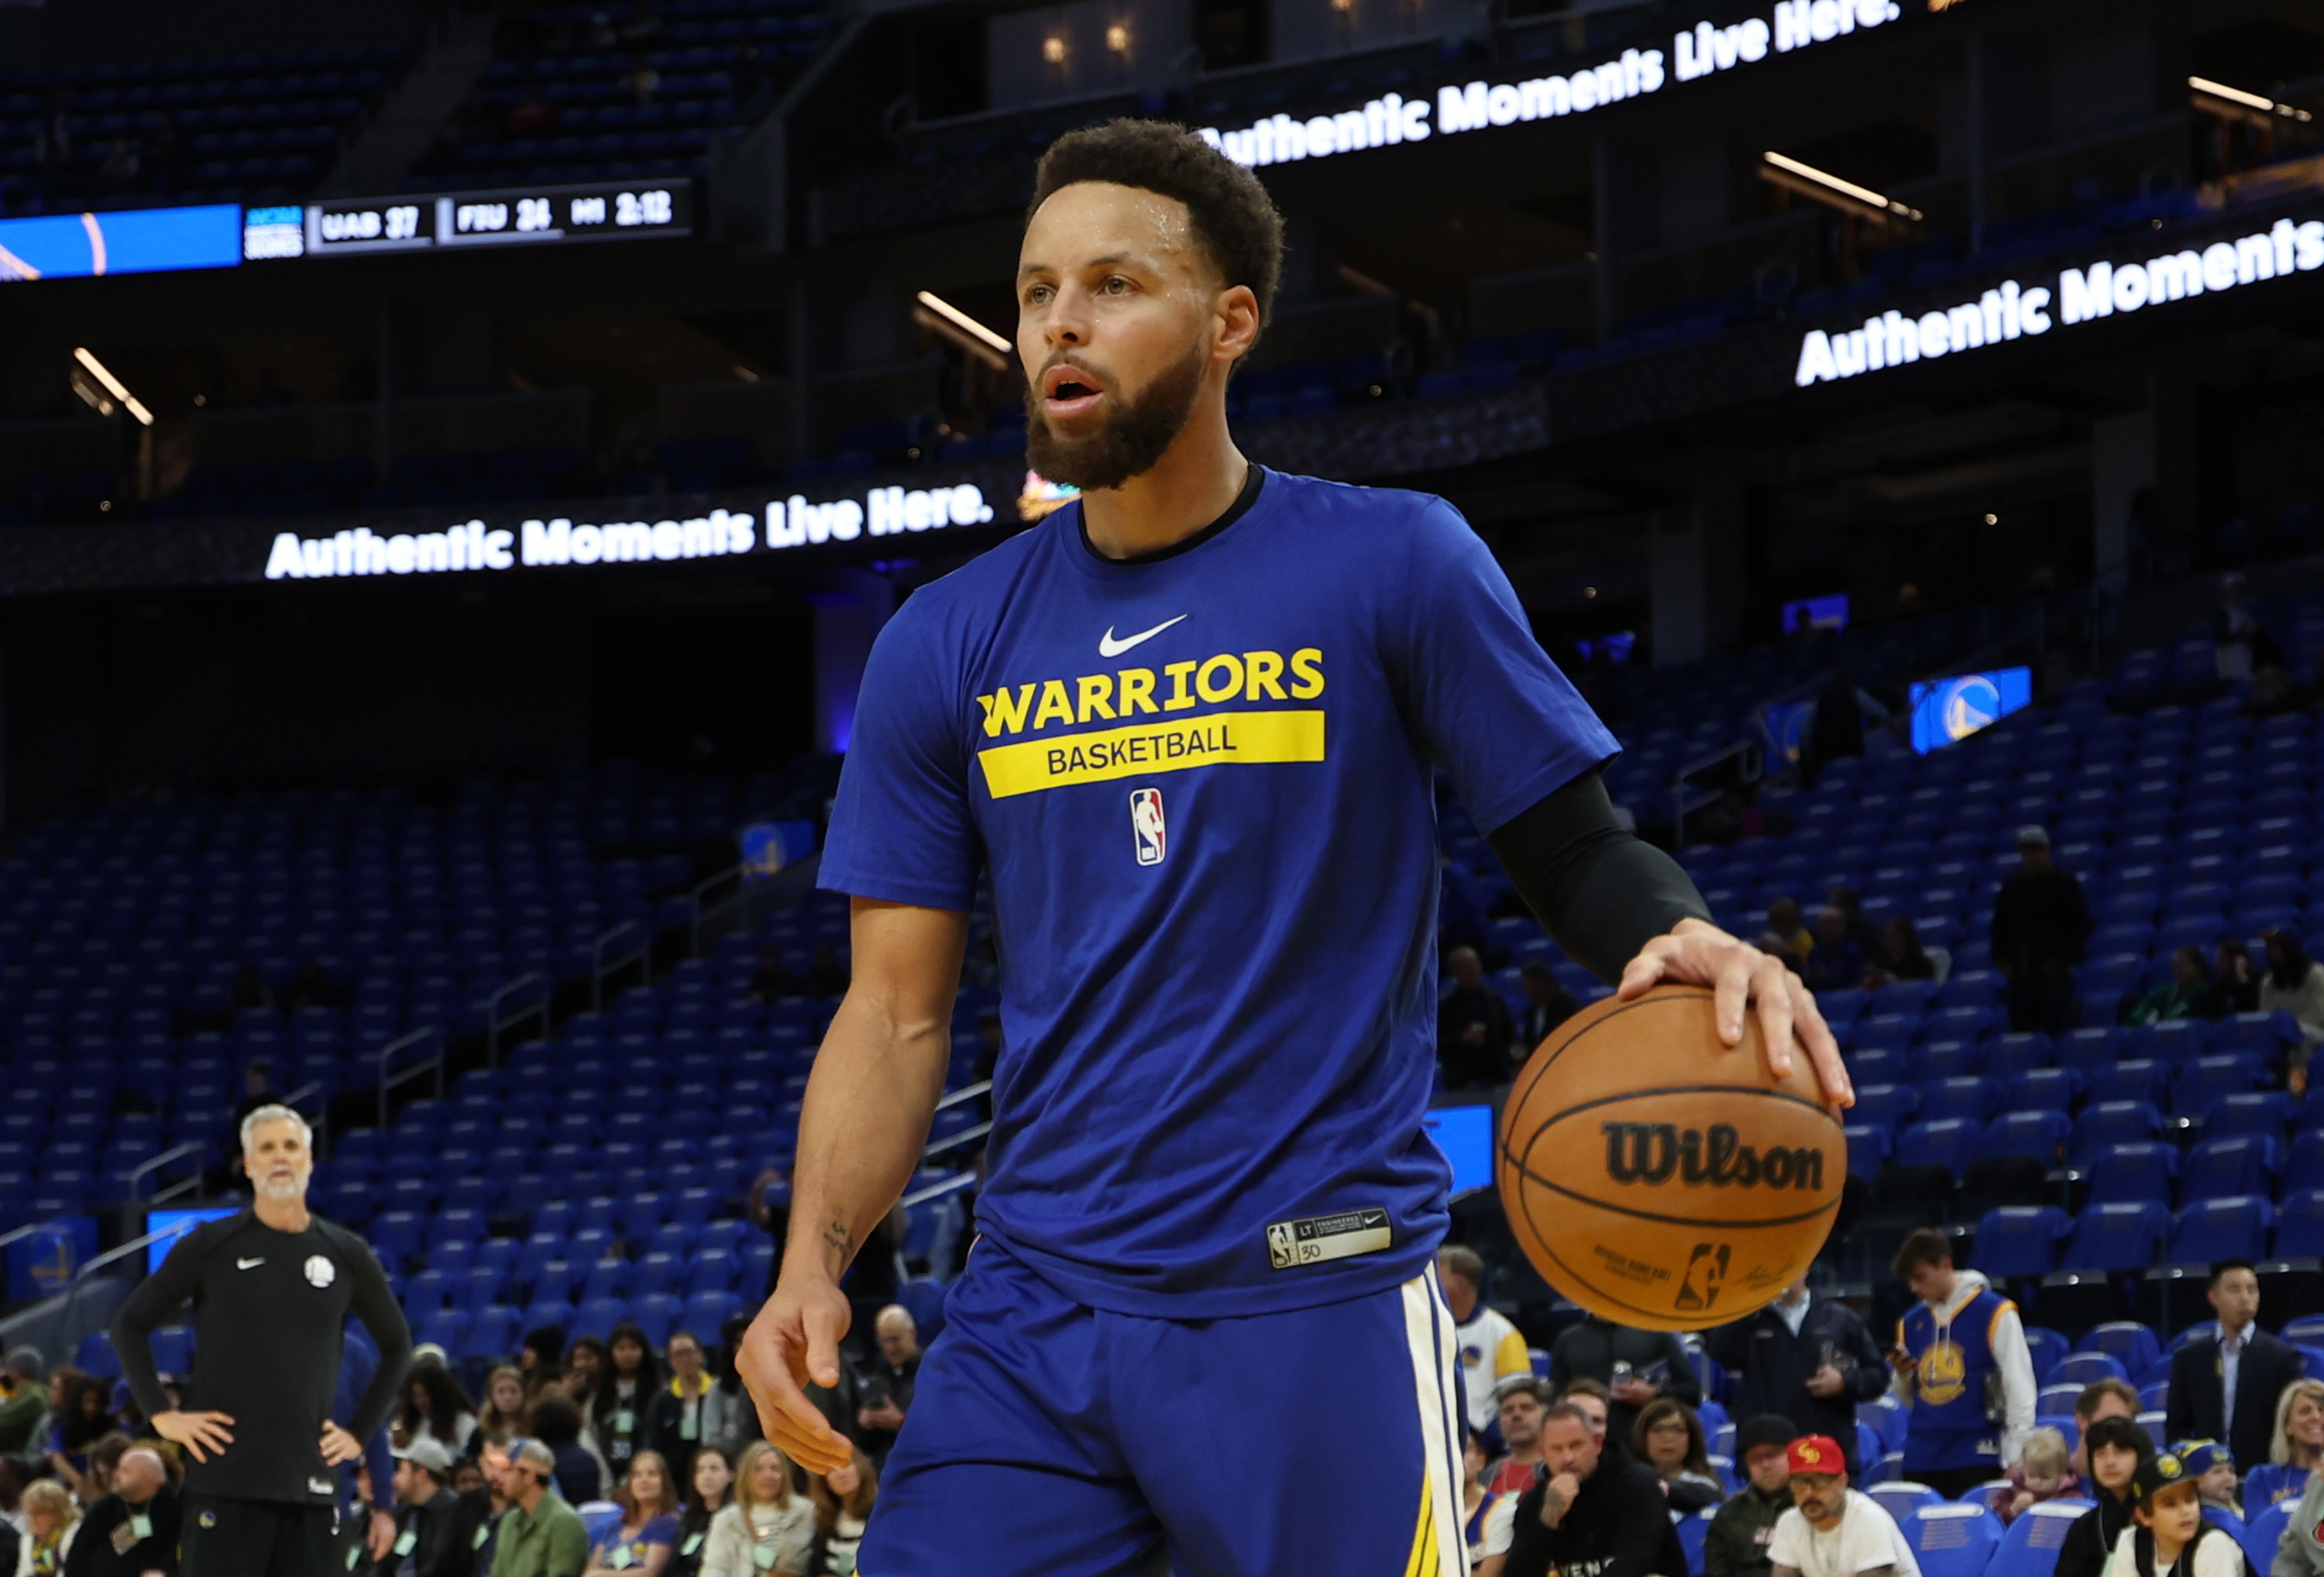 Warriors star Steph Curry wants to play for Team USA at 2024 Olympics